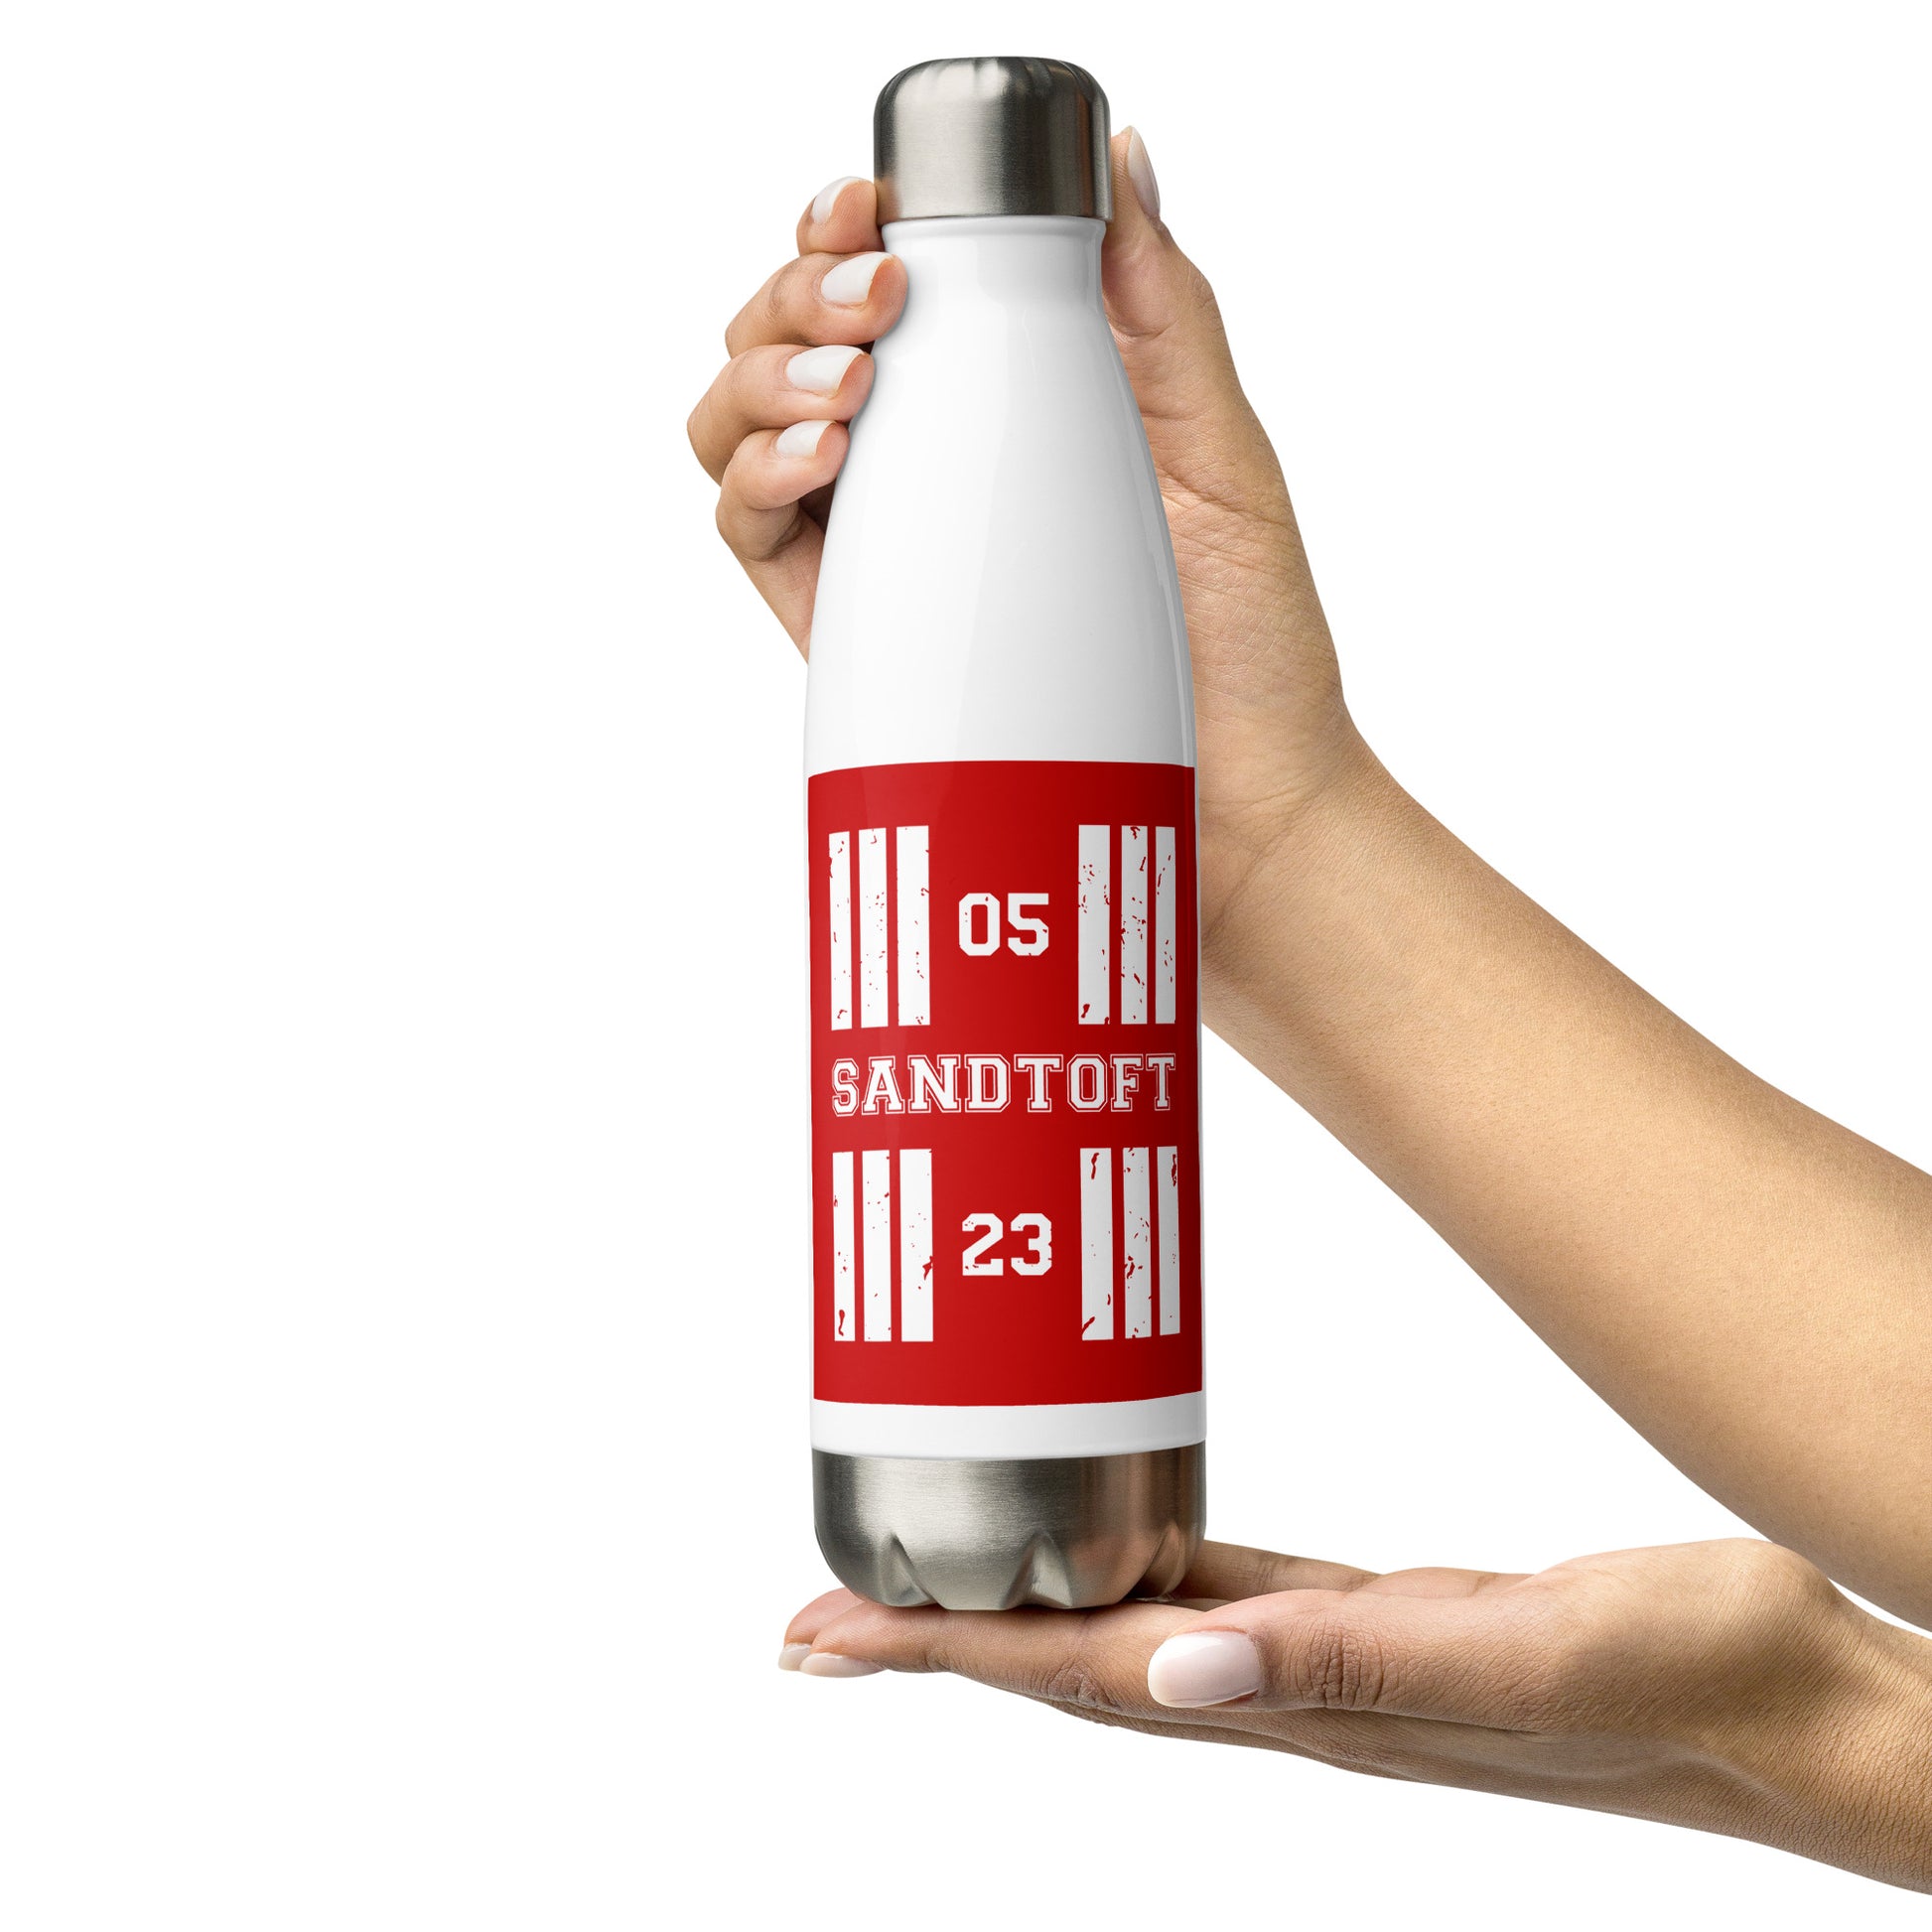 The Sandtoft Airfield runway designator water bottle features a red print with the airport's name and designator framed by stylised threshold markings showing through.